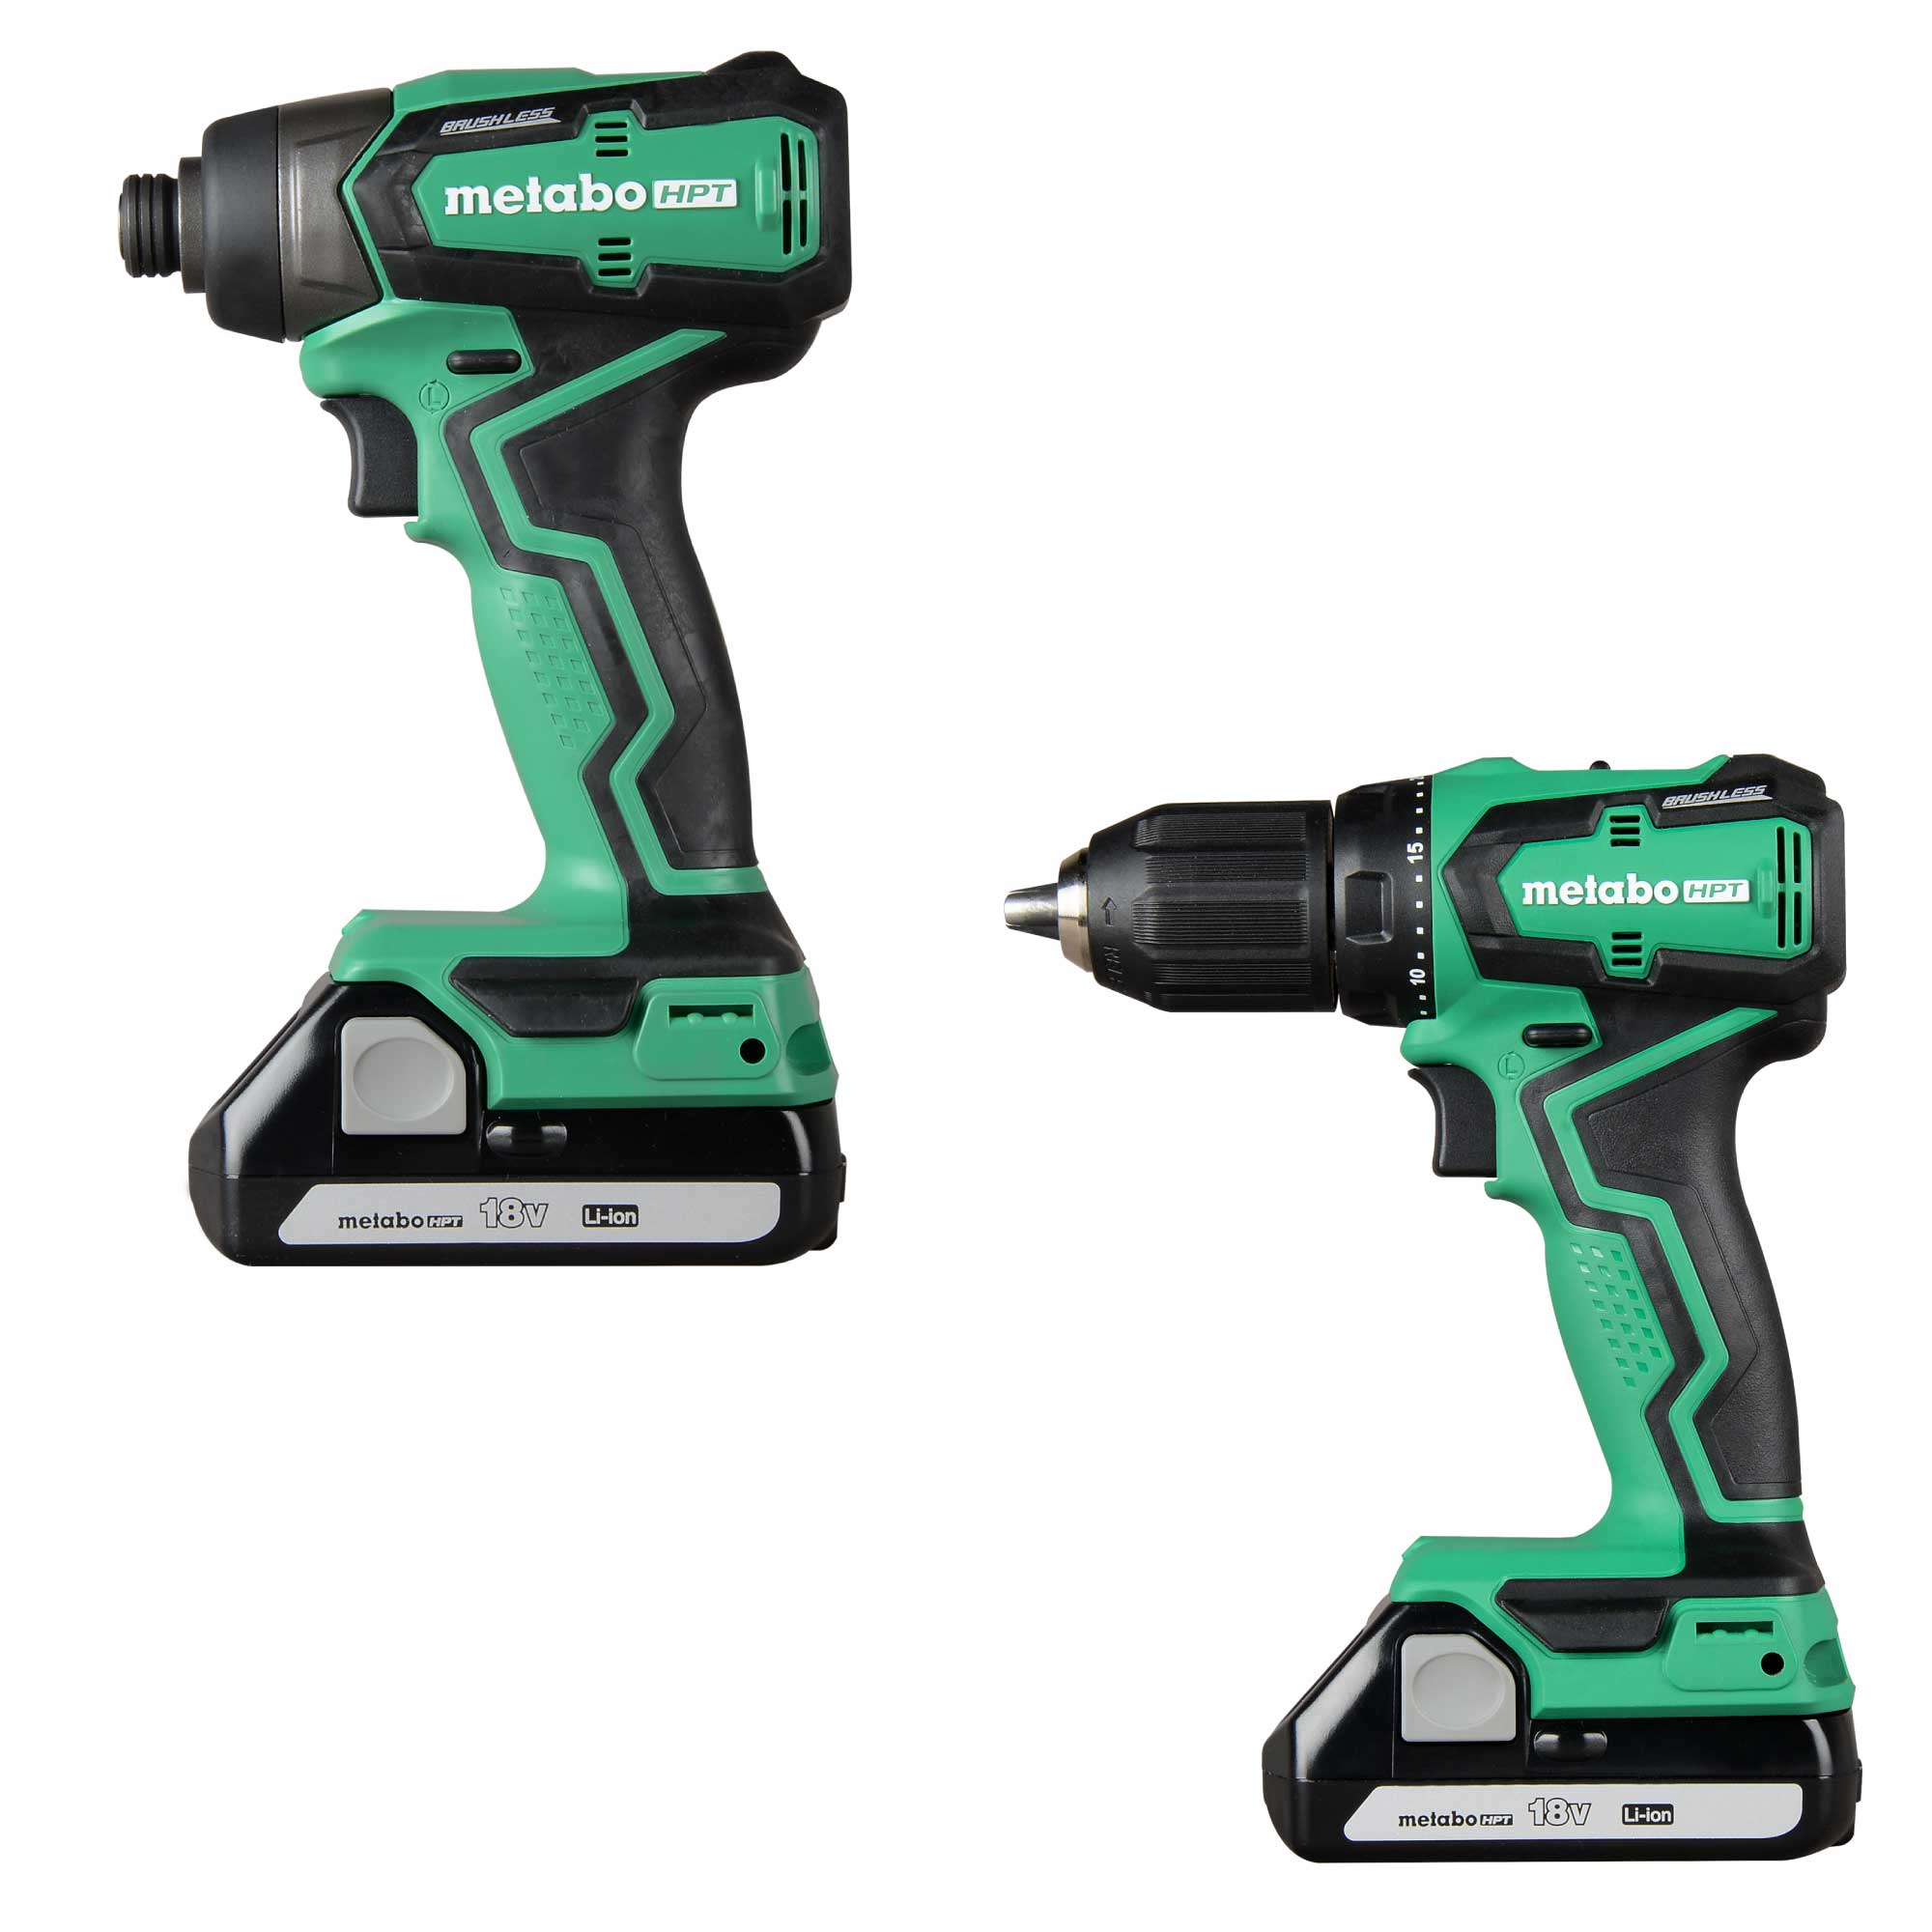 Metabo HPT MultiVolt 18-volt 1/4-in Variable Speed Brushless Cordless Impact Driver (2-batteries included) with MultiVolt 18-volt 1/2-in Keyless